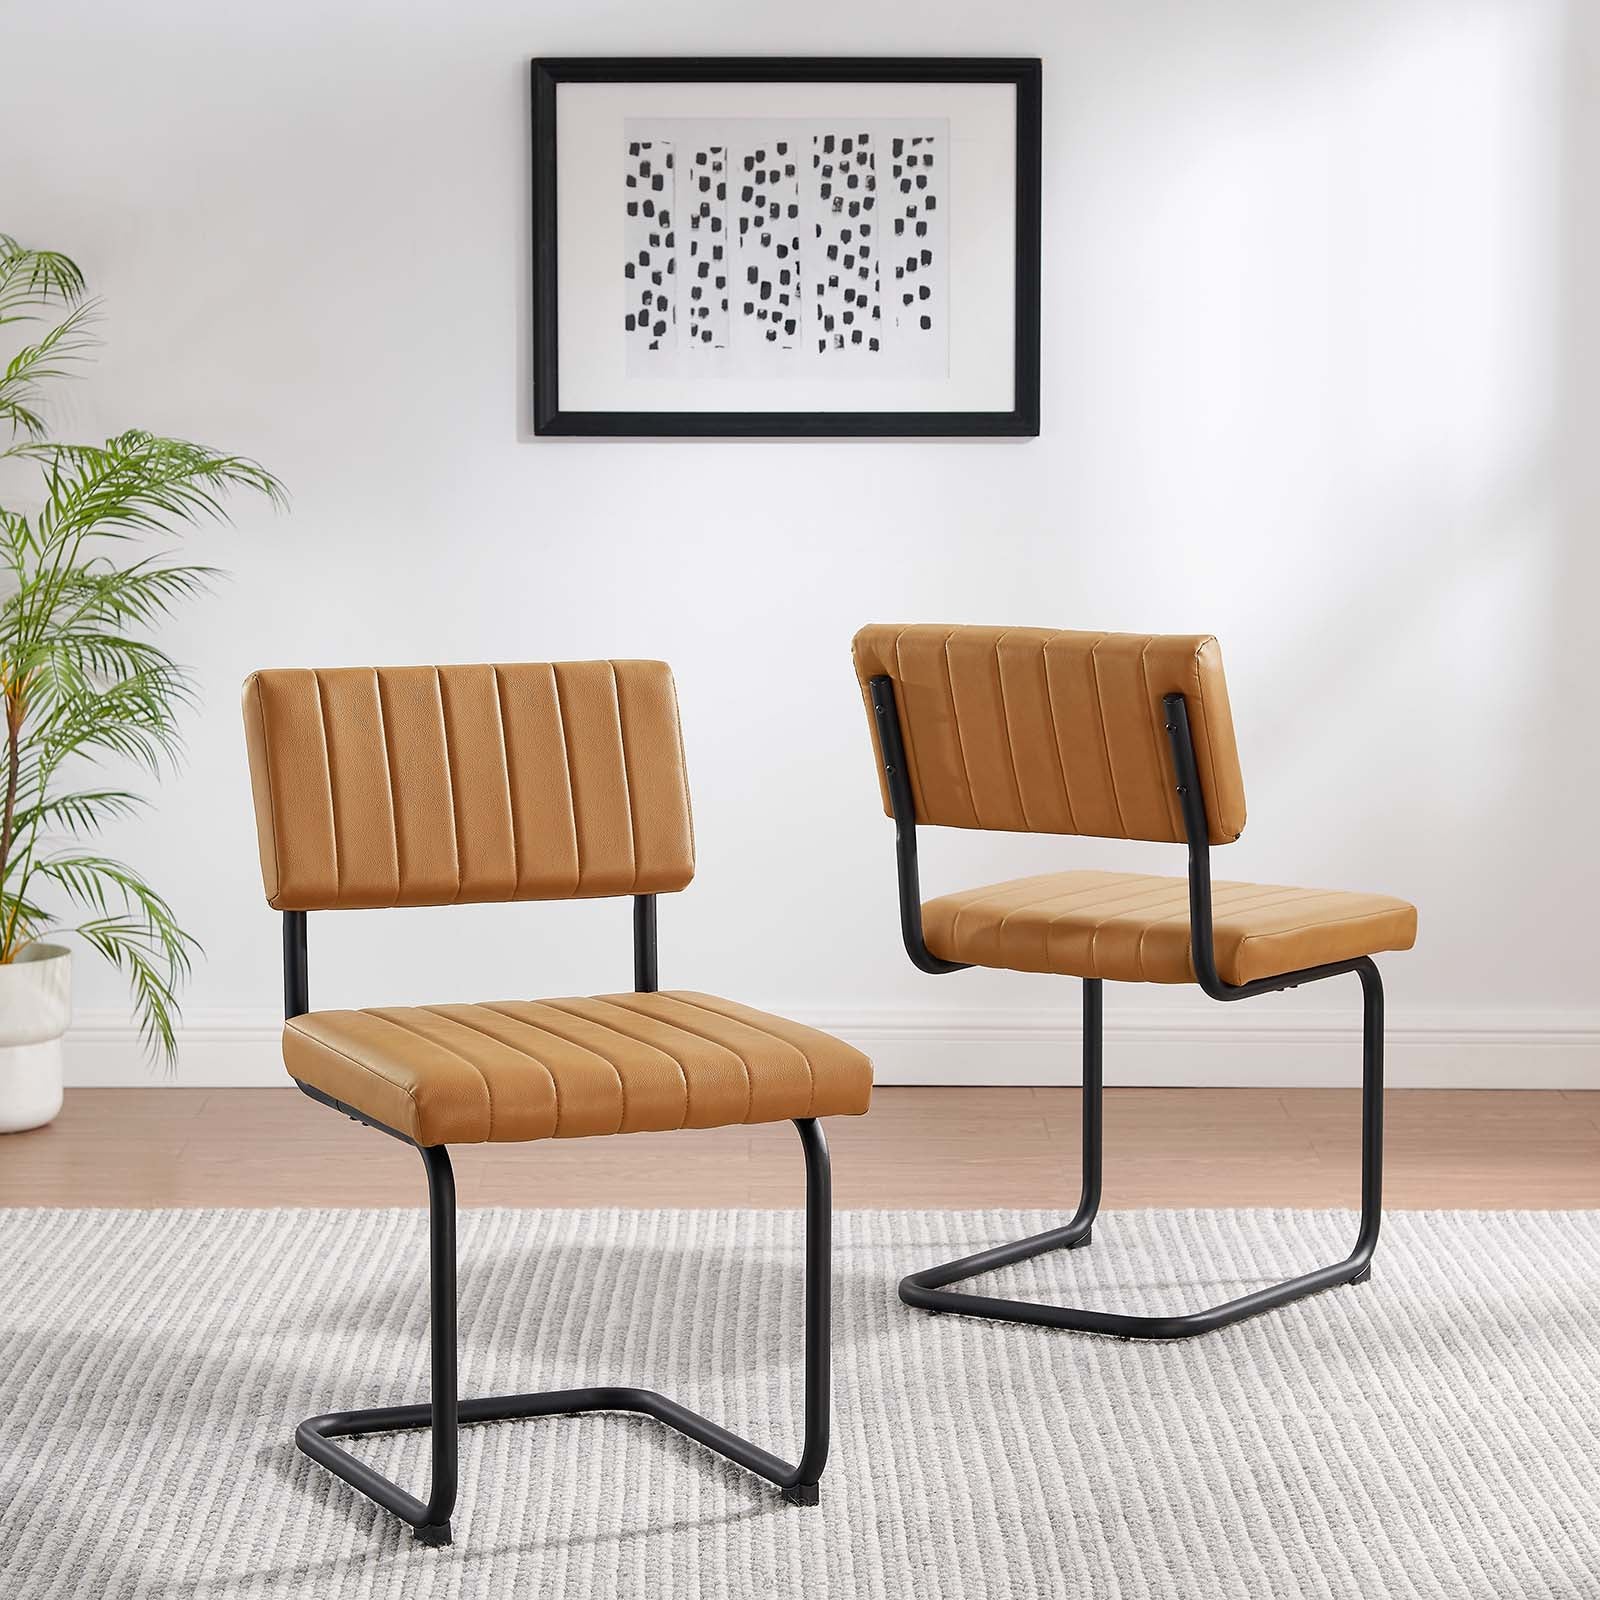 Parity Vegan Leather Dining Side Chairs - Set of 2 - East Shore Modern Home Furnishings